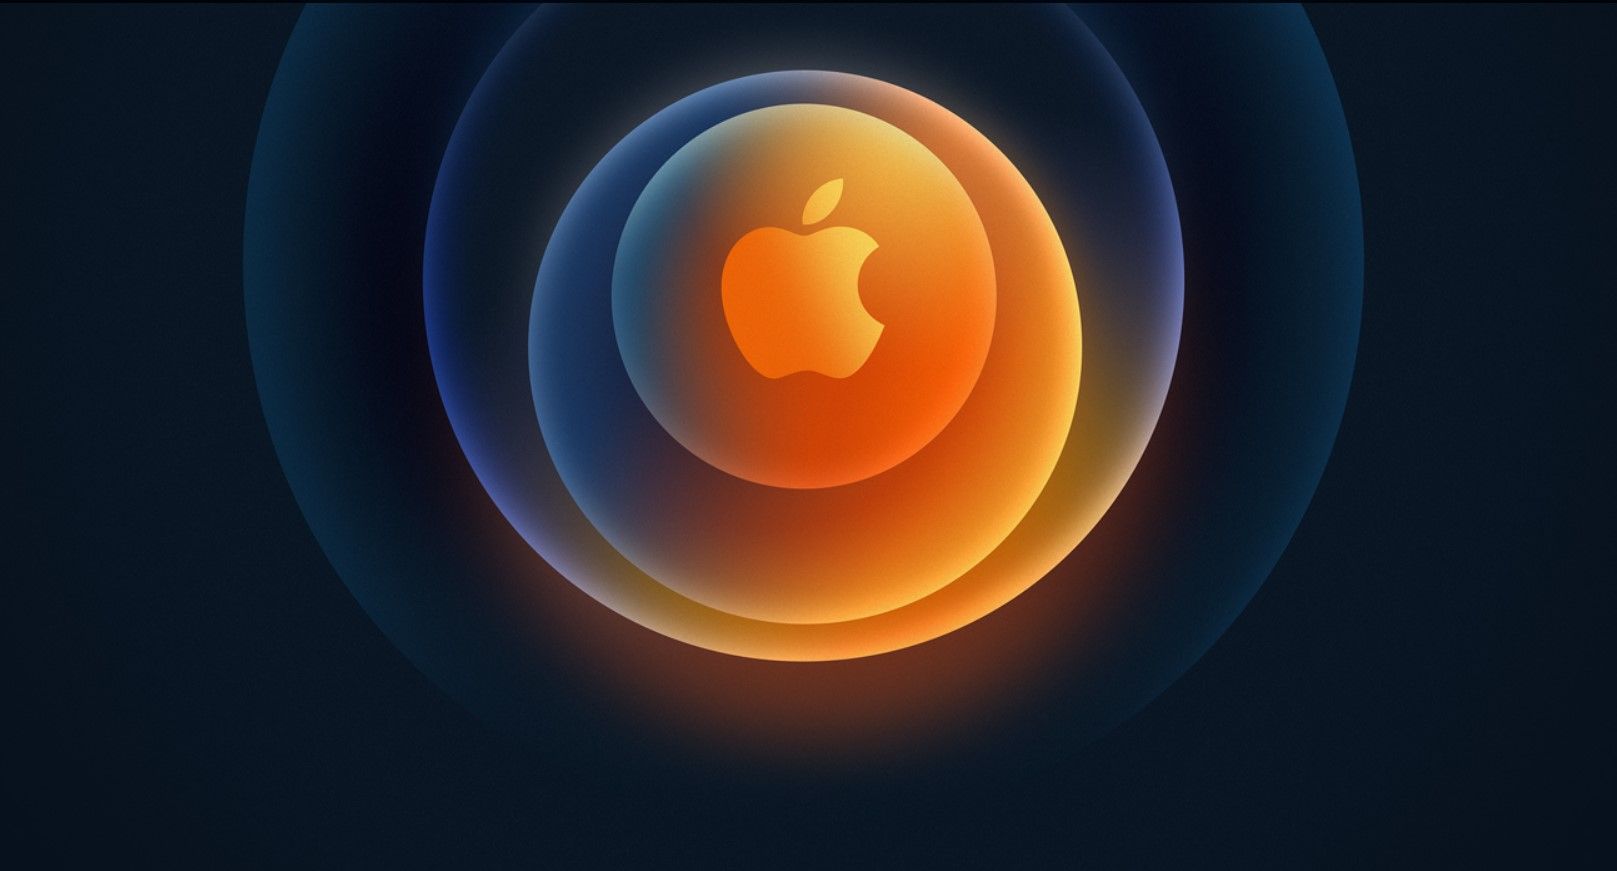 Apple Event 2020 Wallpaper iPhone 12 .androidsage.com